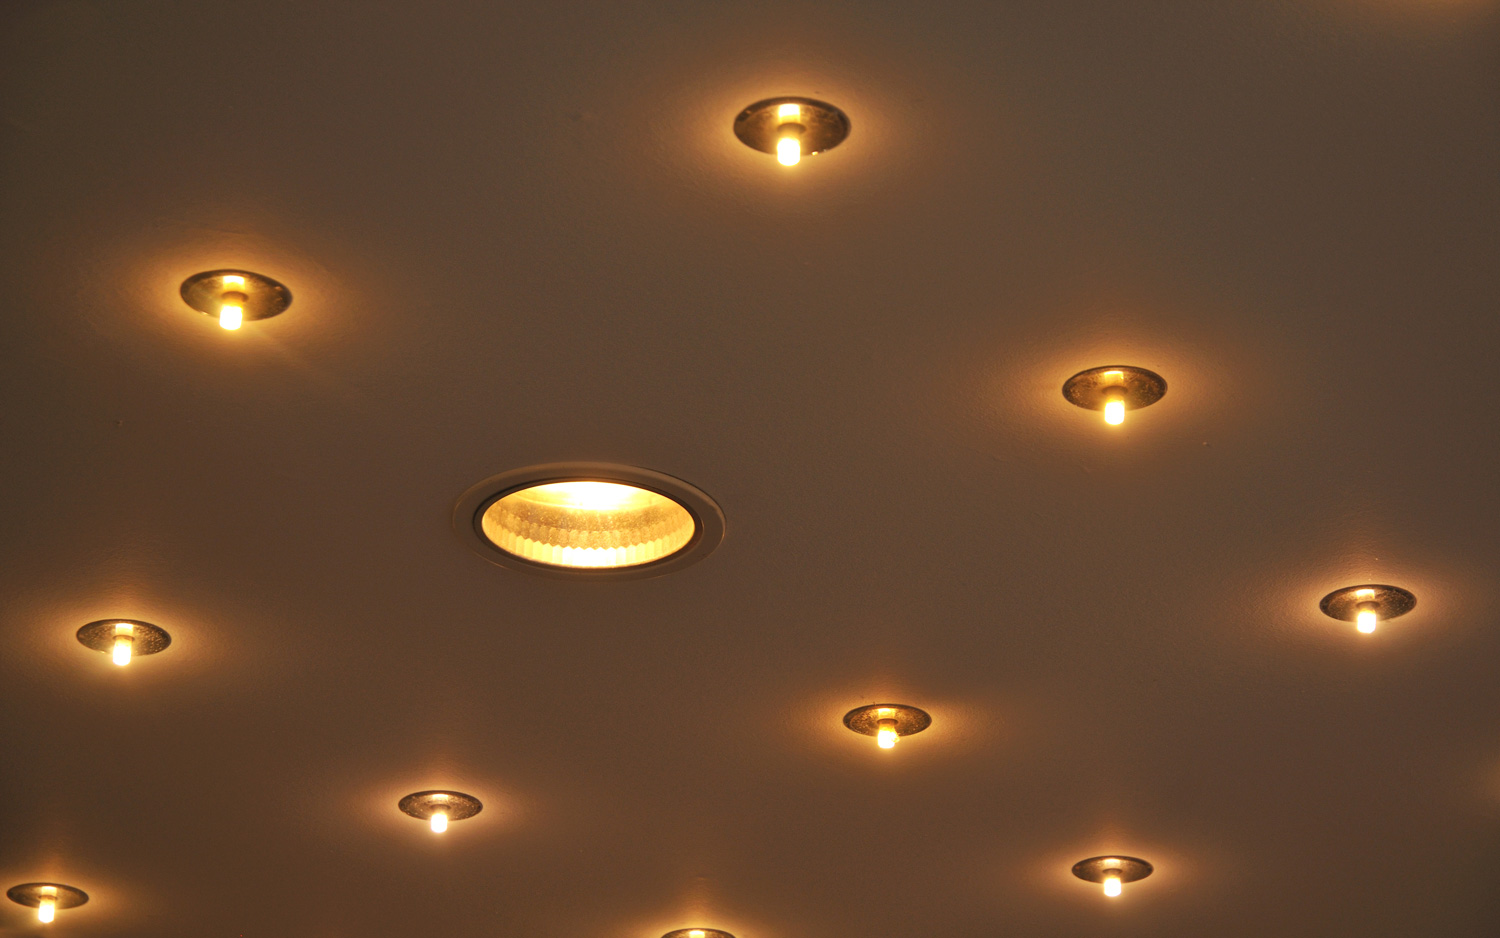 illuminated ceiling with recessed halogen lamps